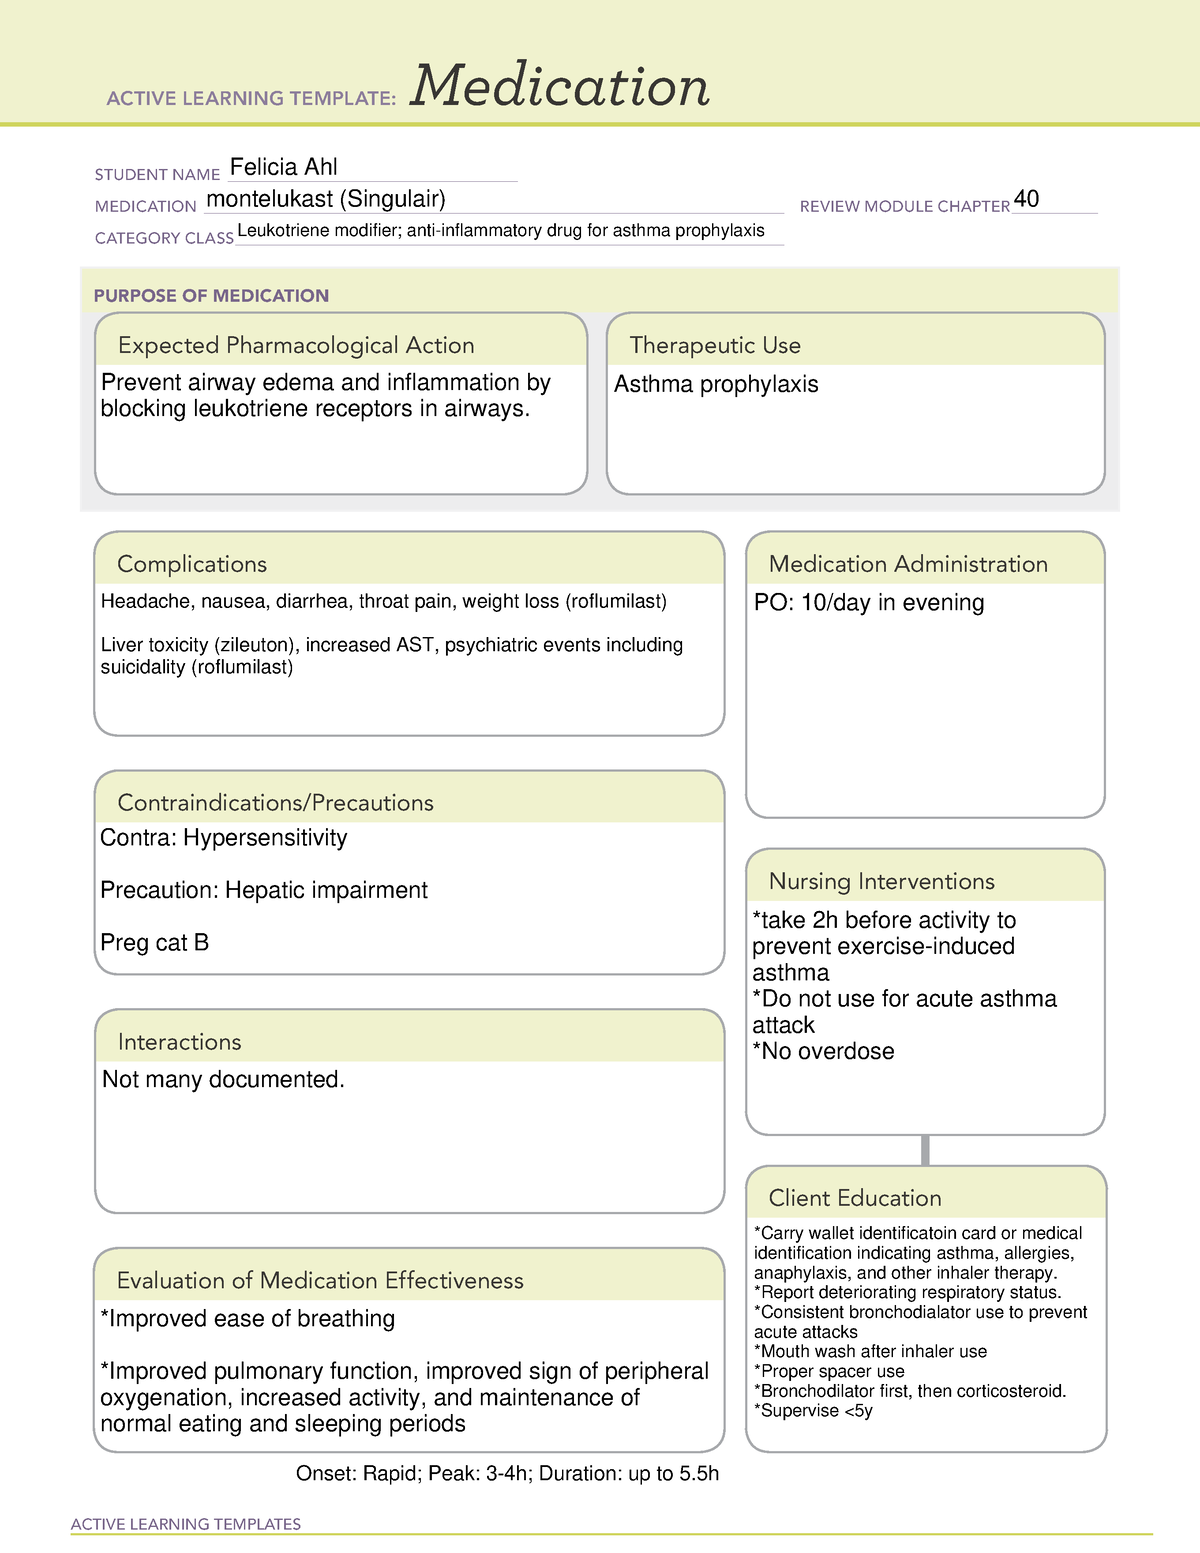 Montelukast drug cards ACTIVE LEARNING TEMPLATES Medication STUDENT